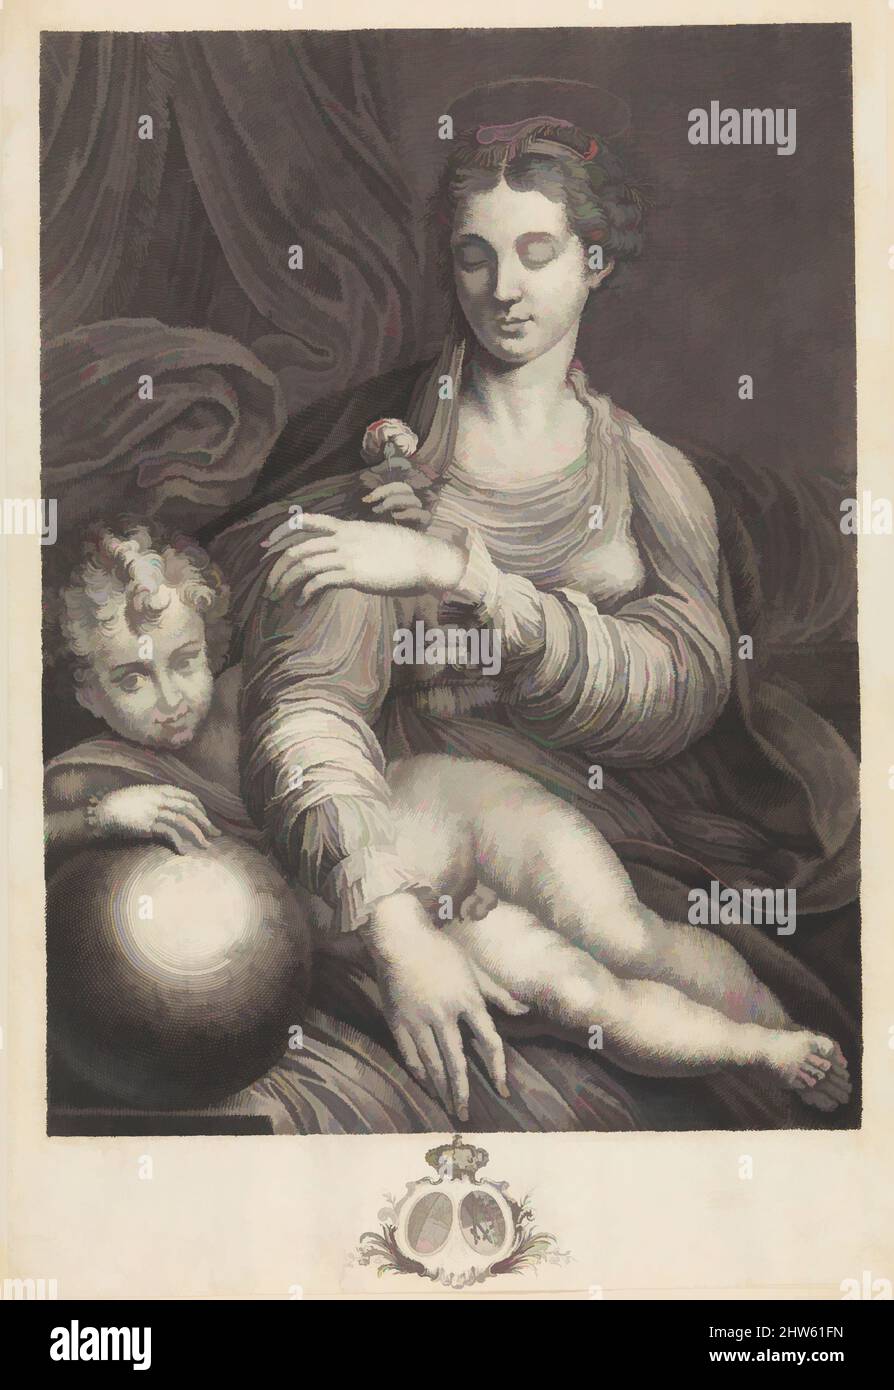 Art inspired by Madonna of the Rose, Engraving, Prints, Engraved by Johann Christian Teucher (German, 1716–1750), After Parmigianino (Girolamo Francesco Maria Mazzola) (Italian, Parma 1503–1540 Casalmaggiore), In Mariette Album, folio 57, Classic works modernized by Artotop with a splash of modernity. Shapes, color and value, eye-catching visual impact on art. Emotions through freedom of artworks in a contemporary way. A timeless message pursuing a wildly creative new direction. Artists turning to the digital medium and creating the Artotop NFT Stock Photo